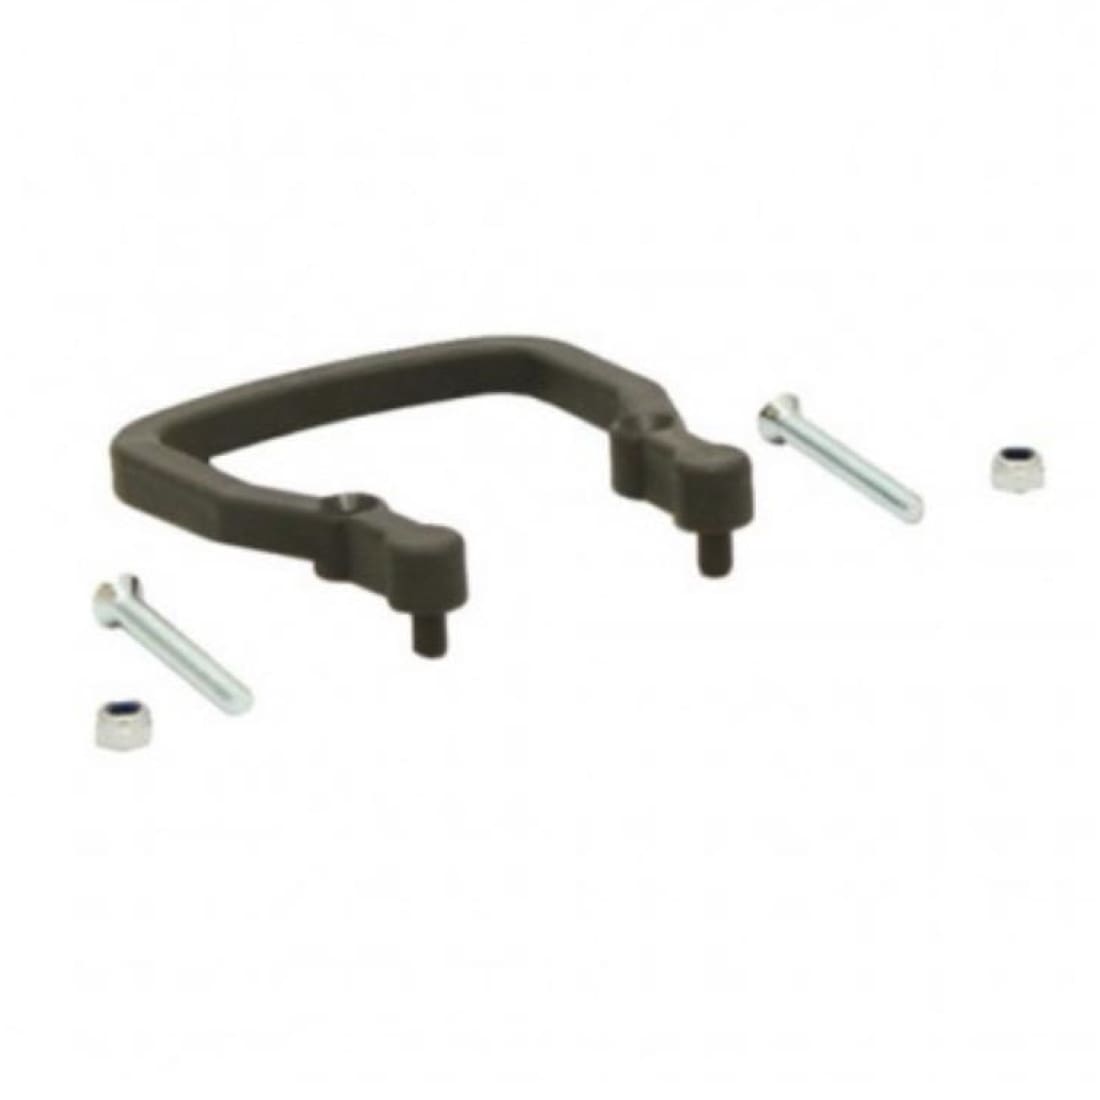 REMA 95239-04 Flat Handle for 320A EURO DIN Battery Connector